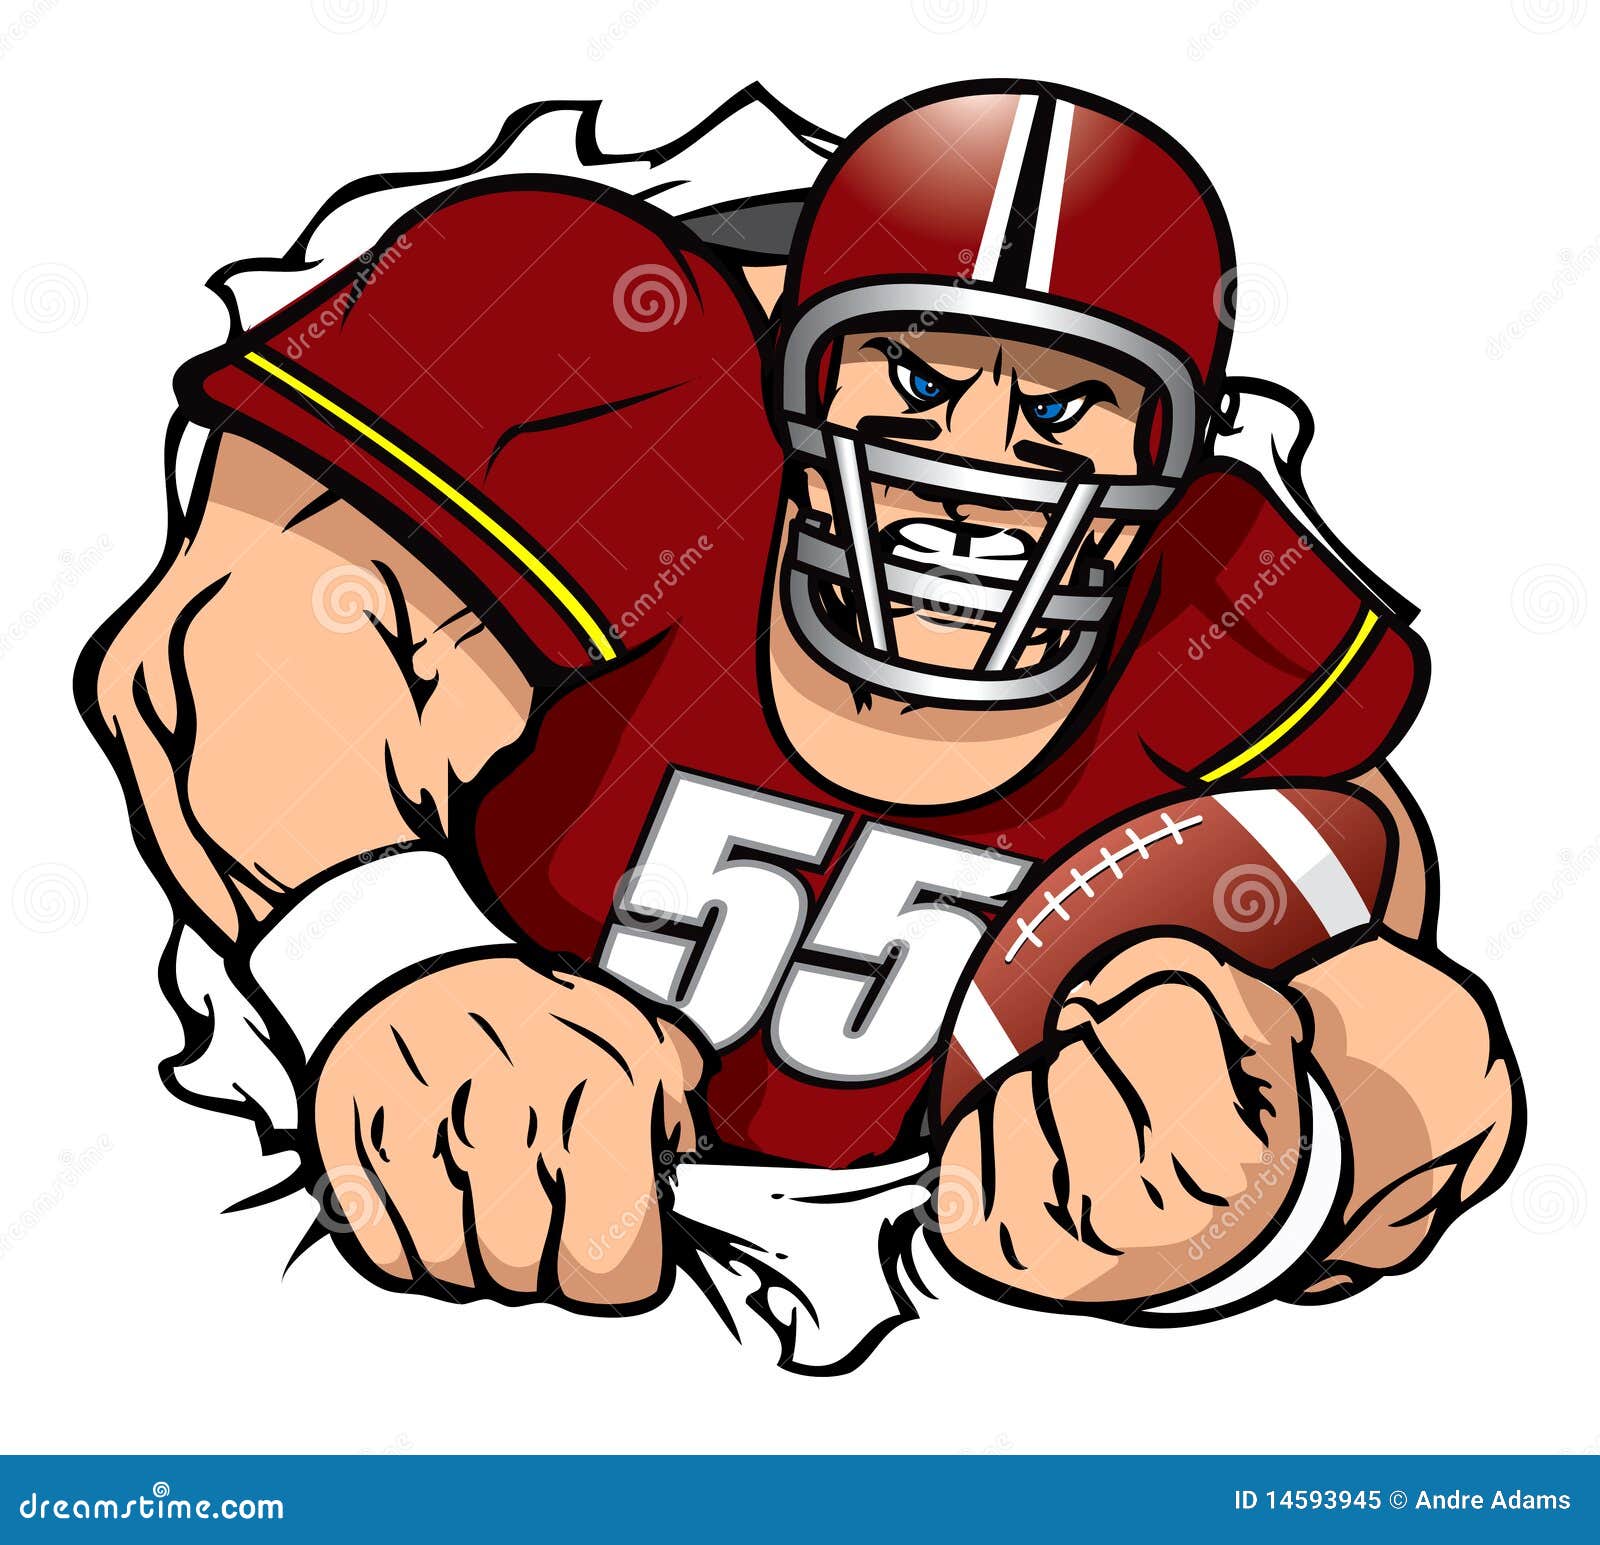 football players clipart - photo #48